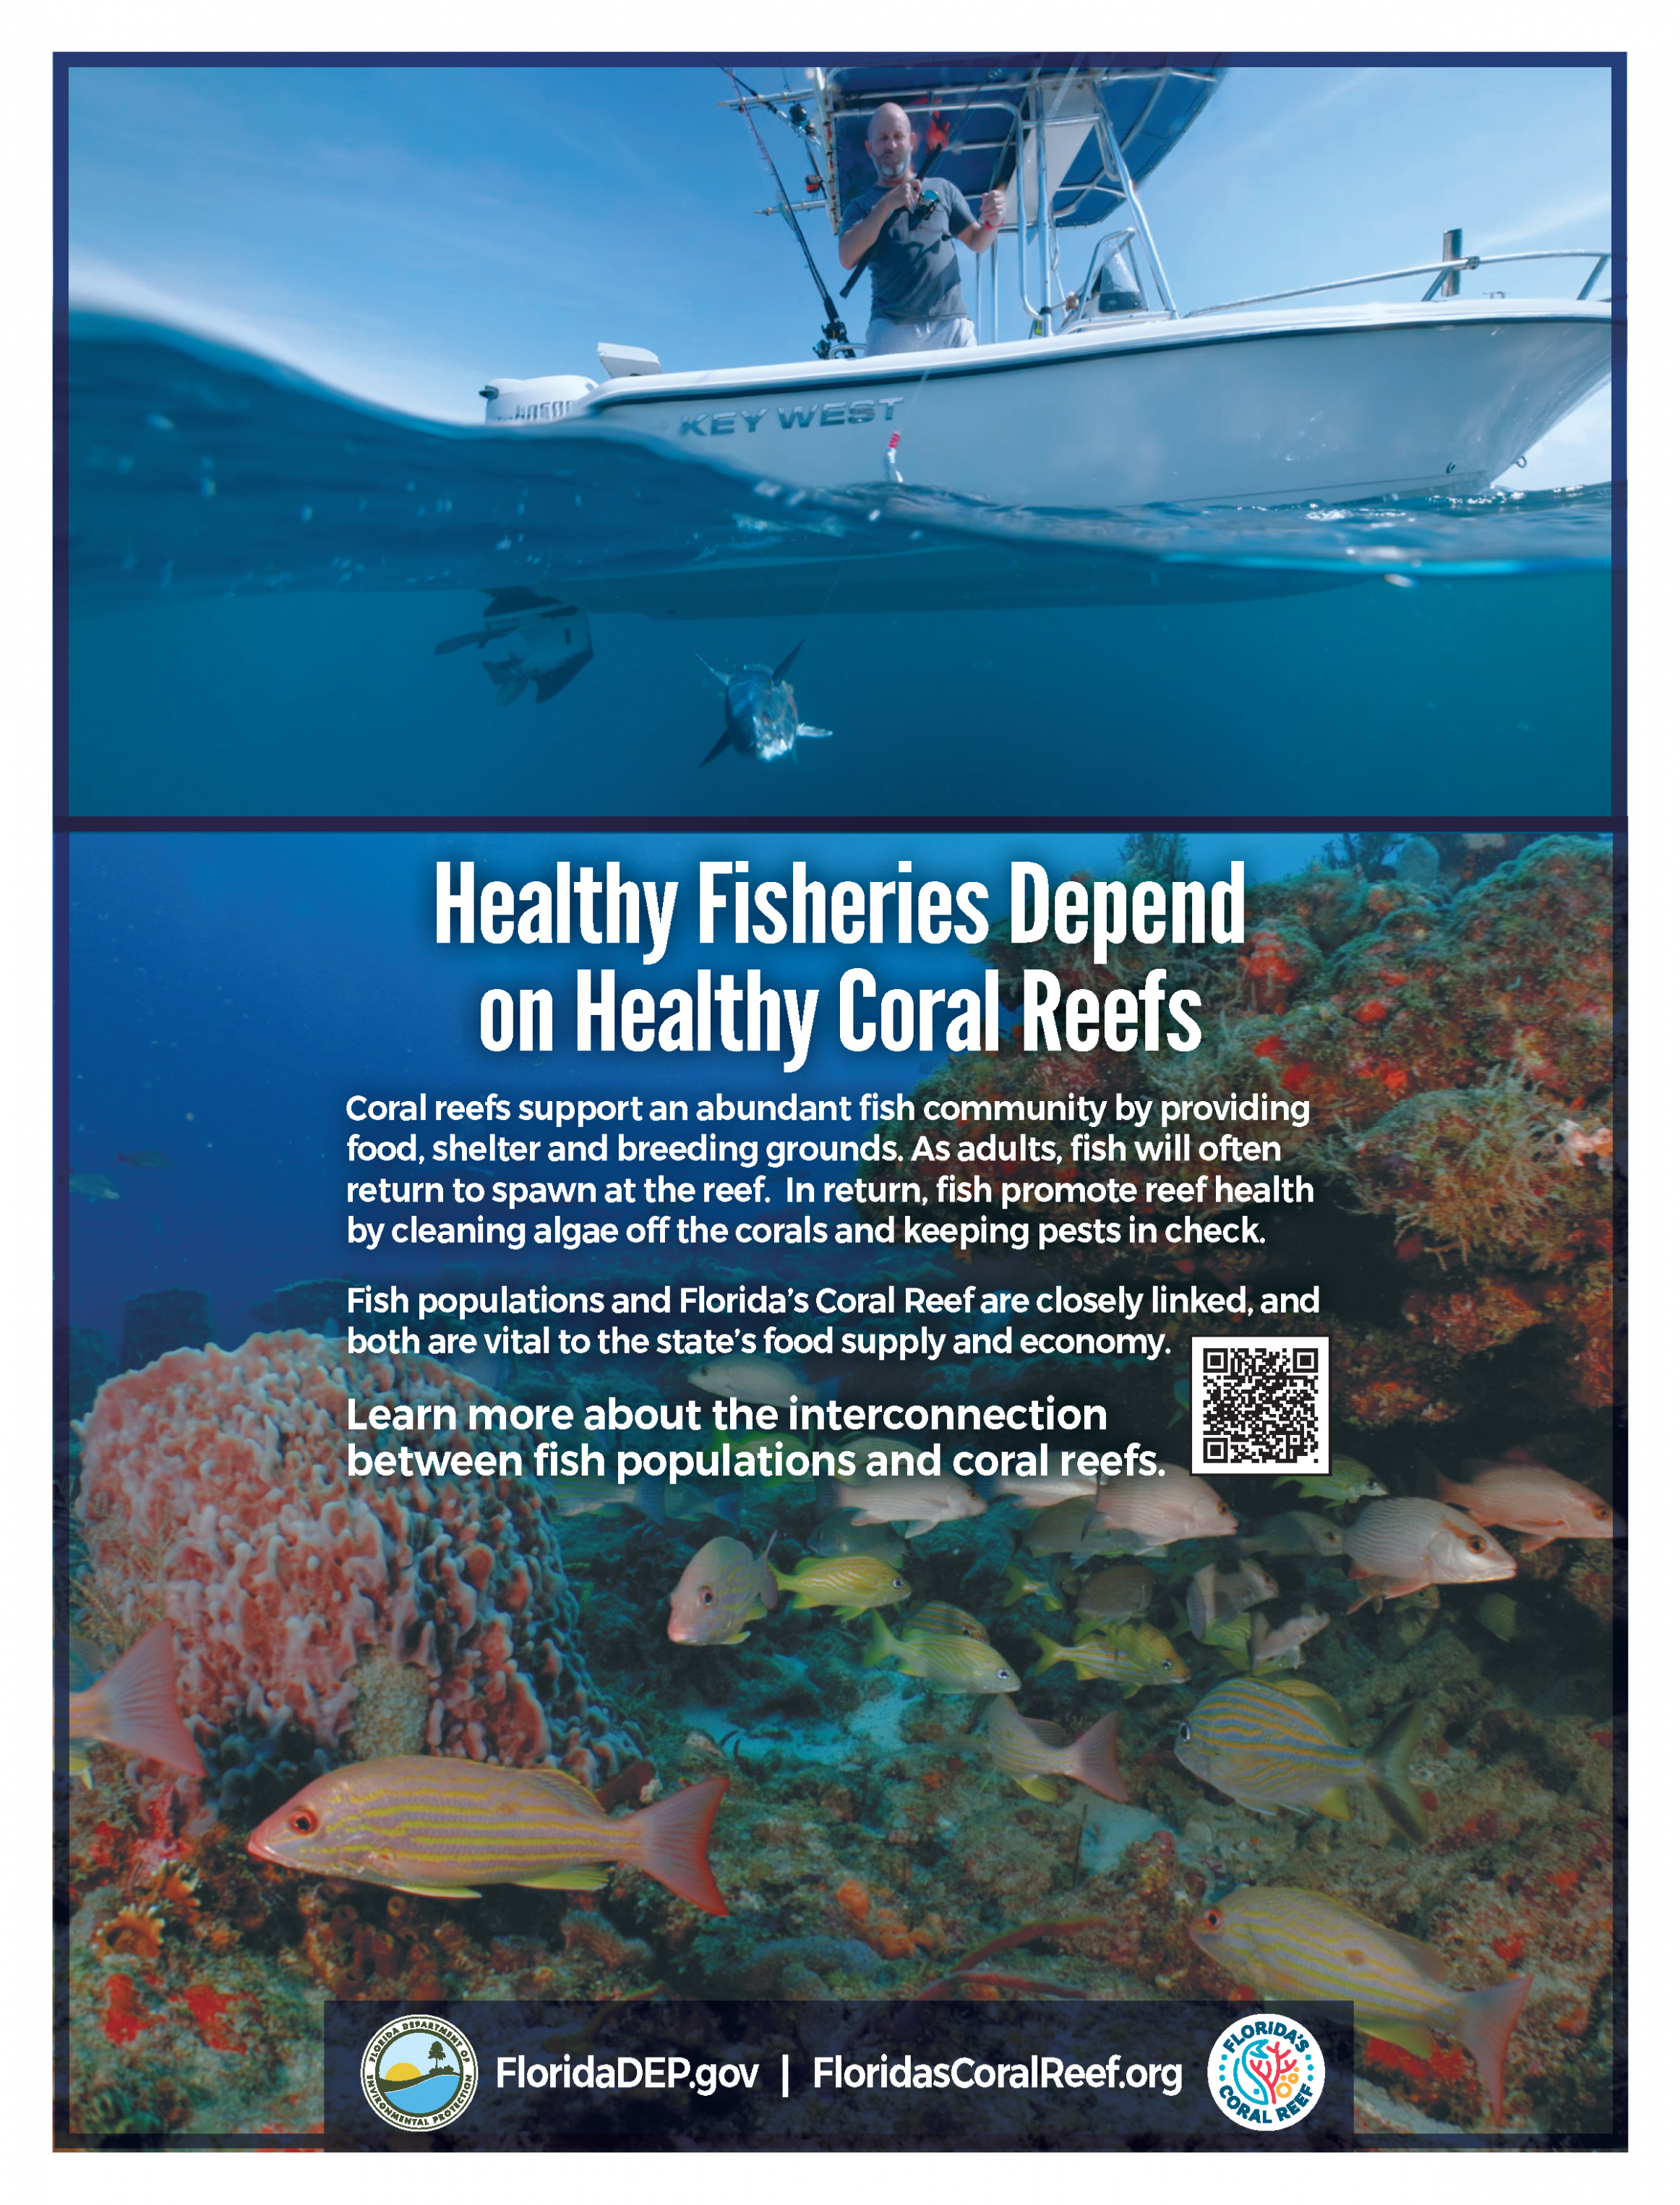 ad showing boater fishing and coral reef under the water beneath the boat